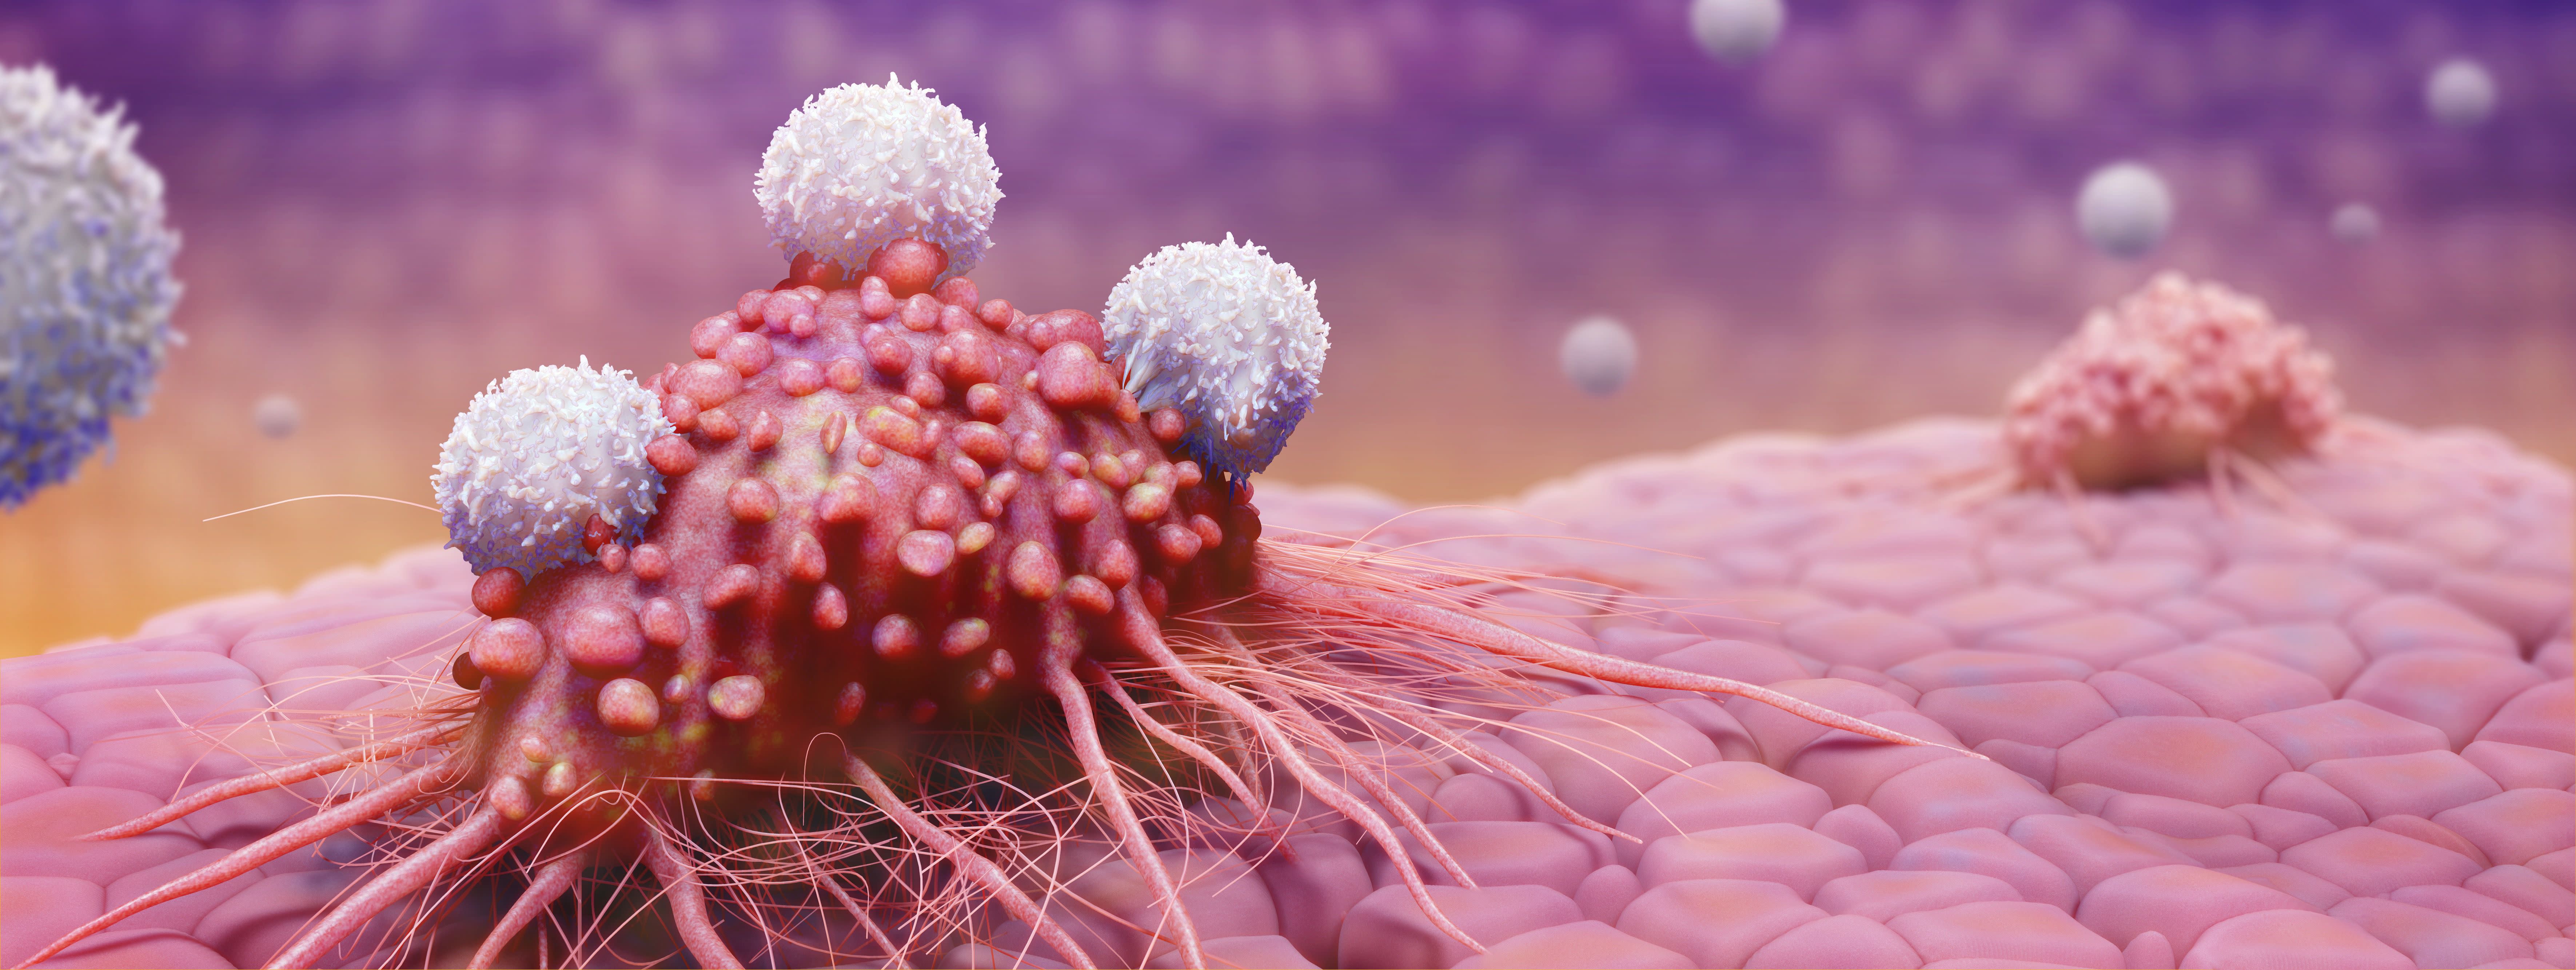 Scientists Just Made a Major Breakthrough in Personalized Cancer Treatment